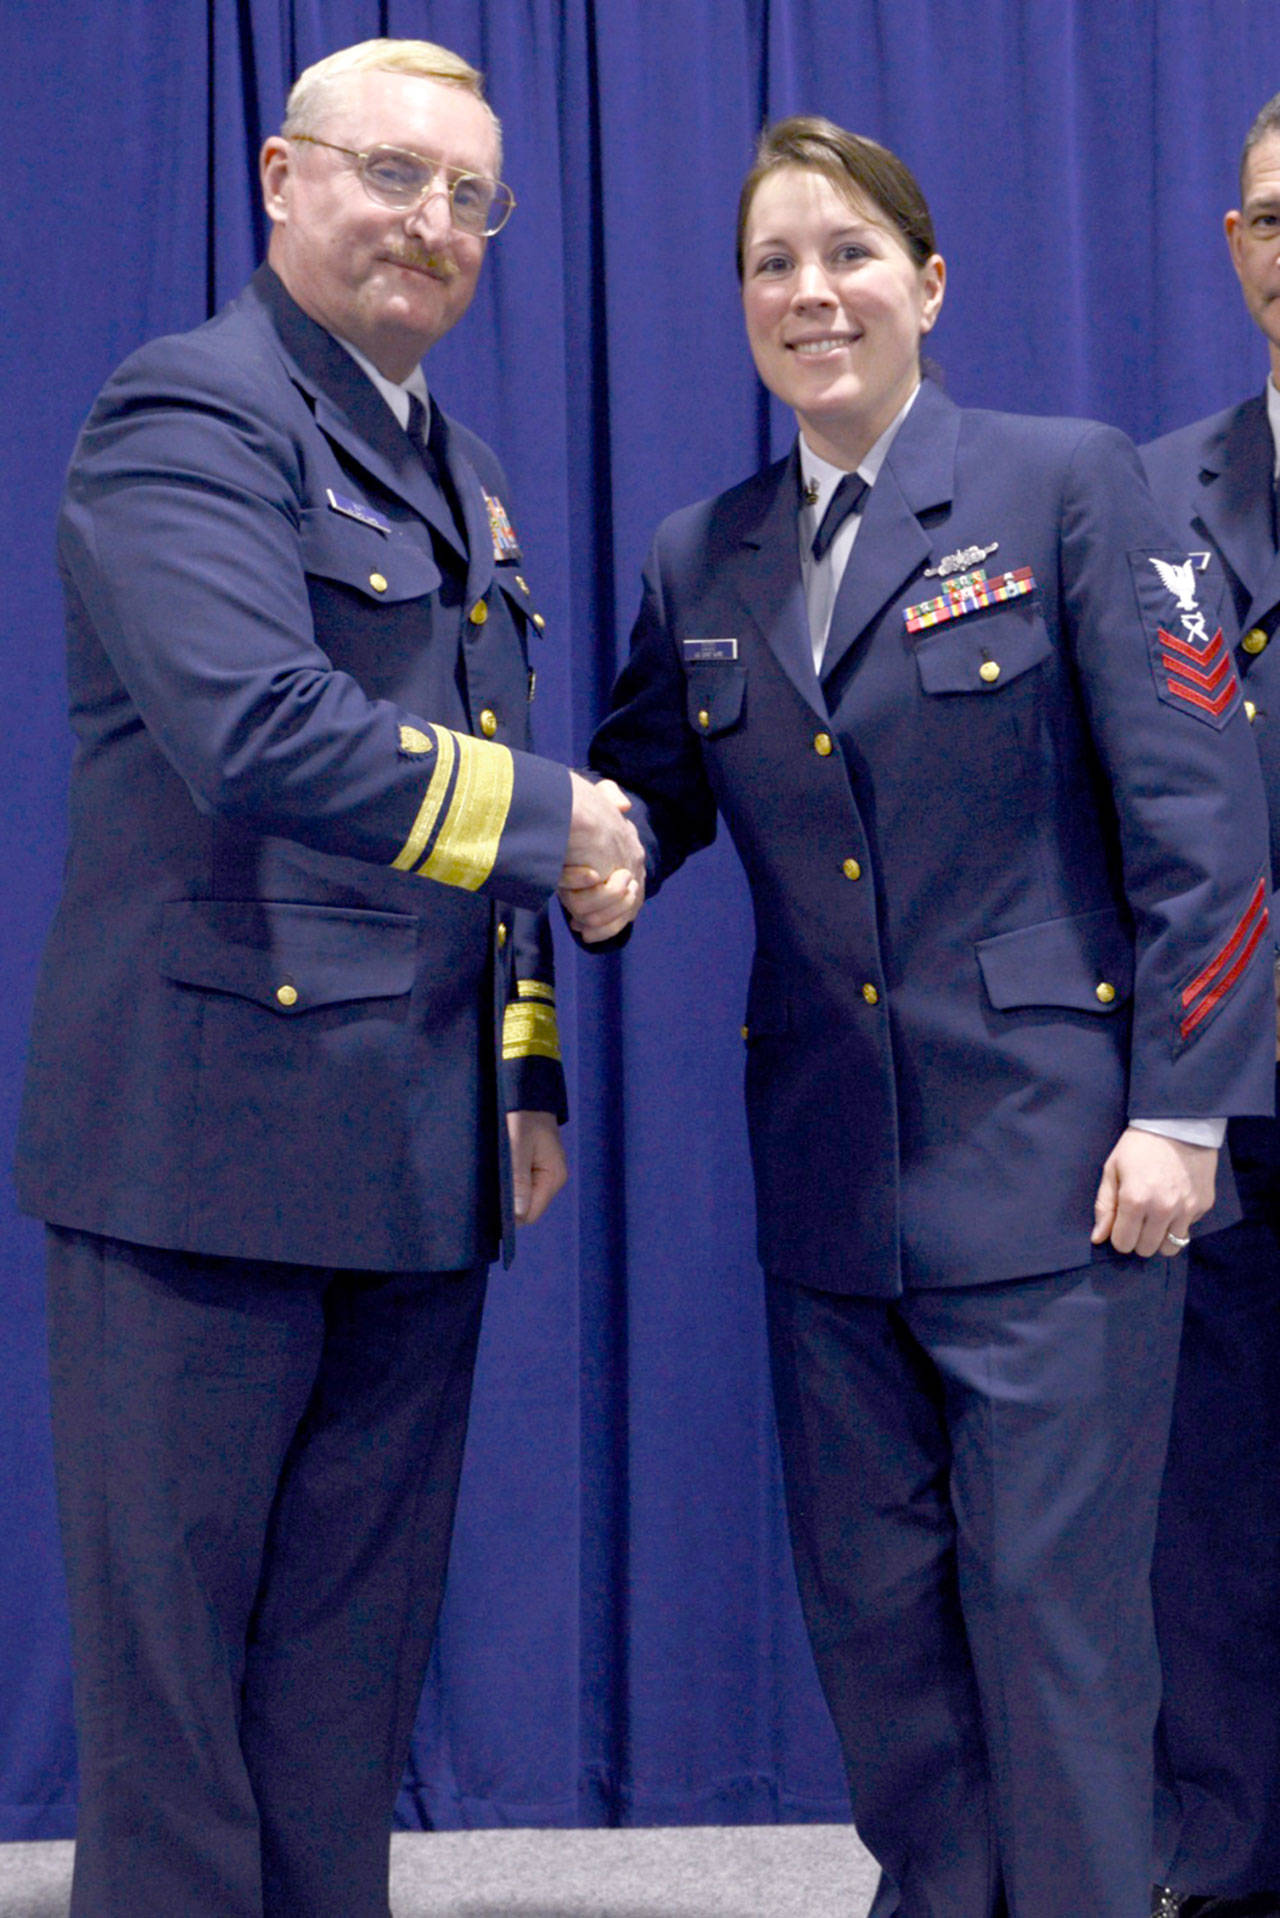 Rear Adm. Mark Butt, commander of the Coast Guard 13th District, shakes hands with Petty Officer 1st Class Tara Dodd after she was announced as the enlisted person of the year at a ceremony held at Coast Guard Base Seattle last week. (Amanda Norcross/U.S. Coast Guard)